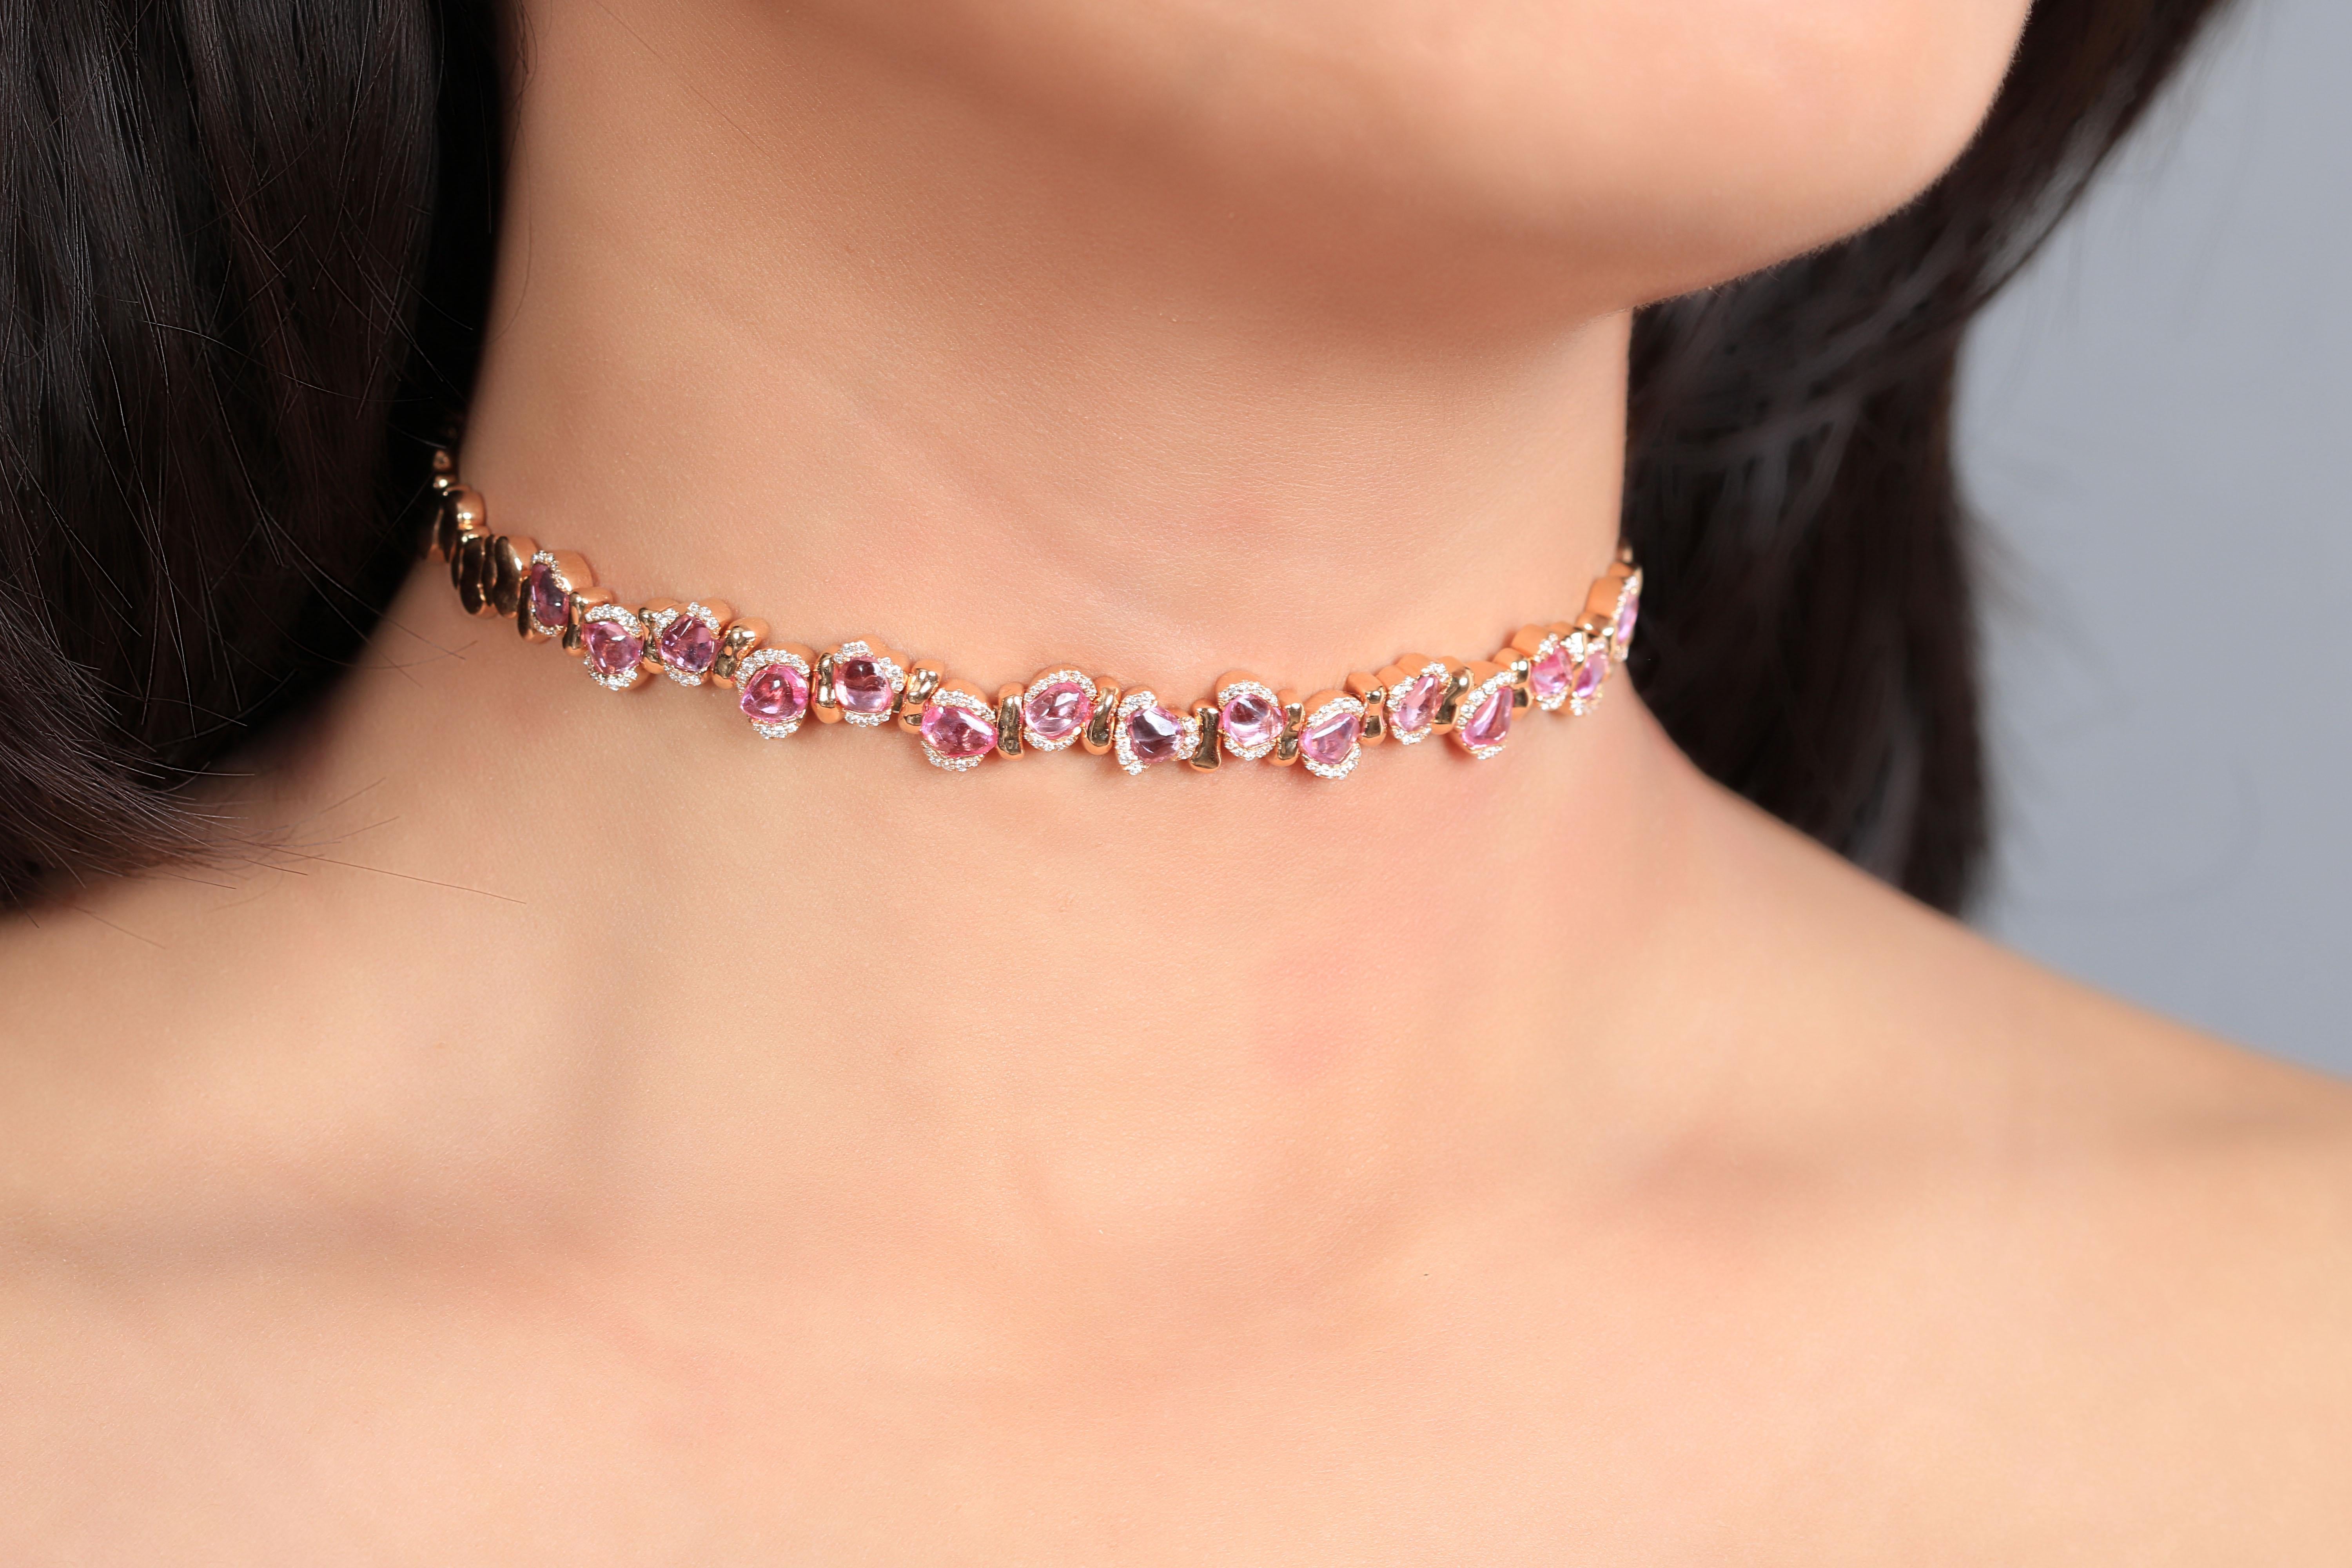 Designed with simplicity, this rose gold choker is adorned with pave white diamonds on the sides while tumbled pink sapphires appear elegantly in the middle. The gold in this choker is handcrafted around the stone rather than forcing it into